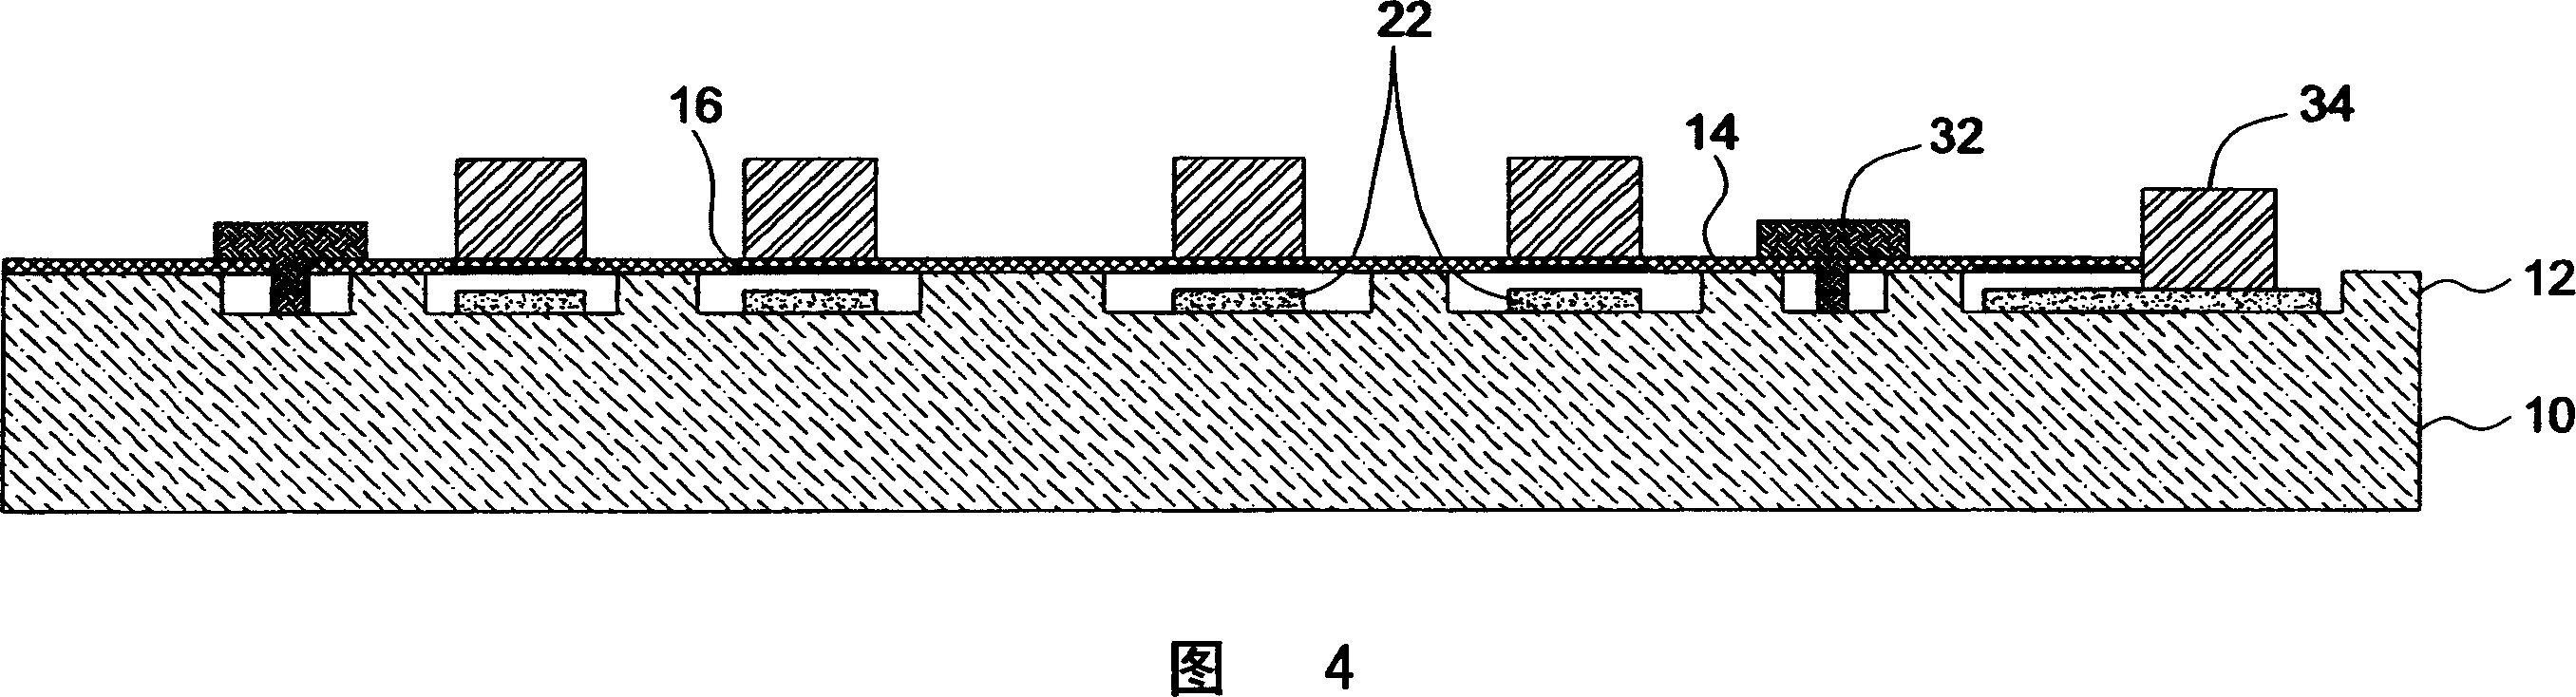 Capacitive micromachined ultrasound transducer and methods of making the same